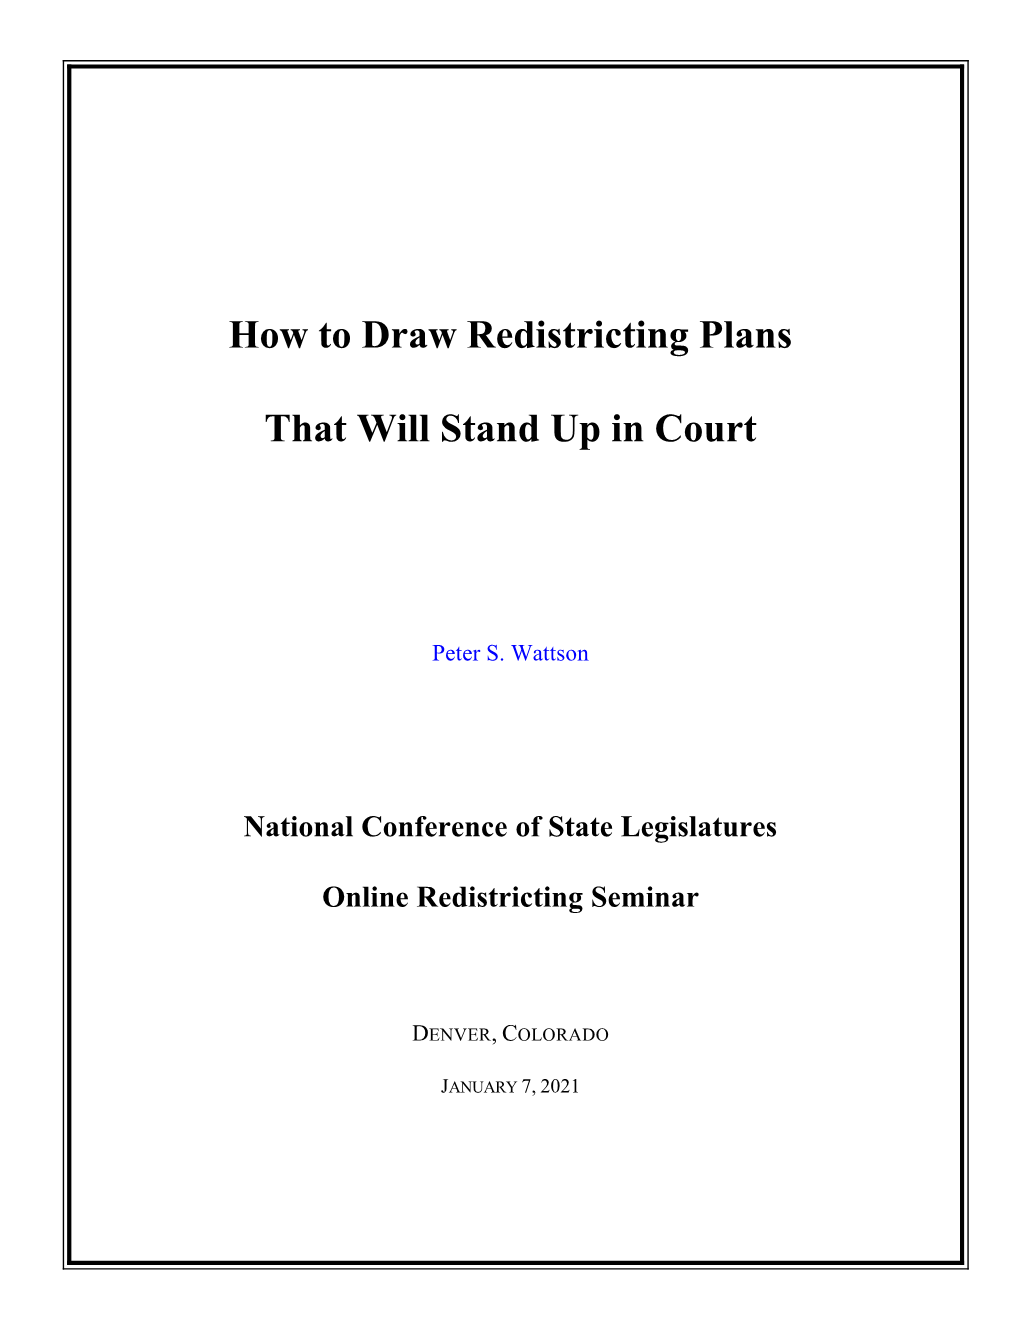 How to Draw Redistricting Plans That Will Stand up in Court